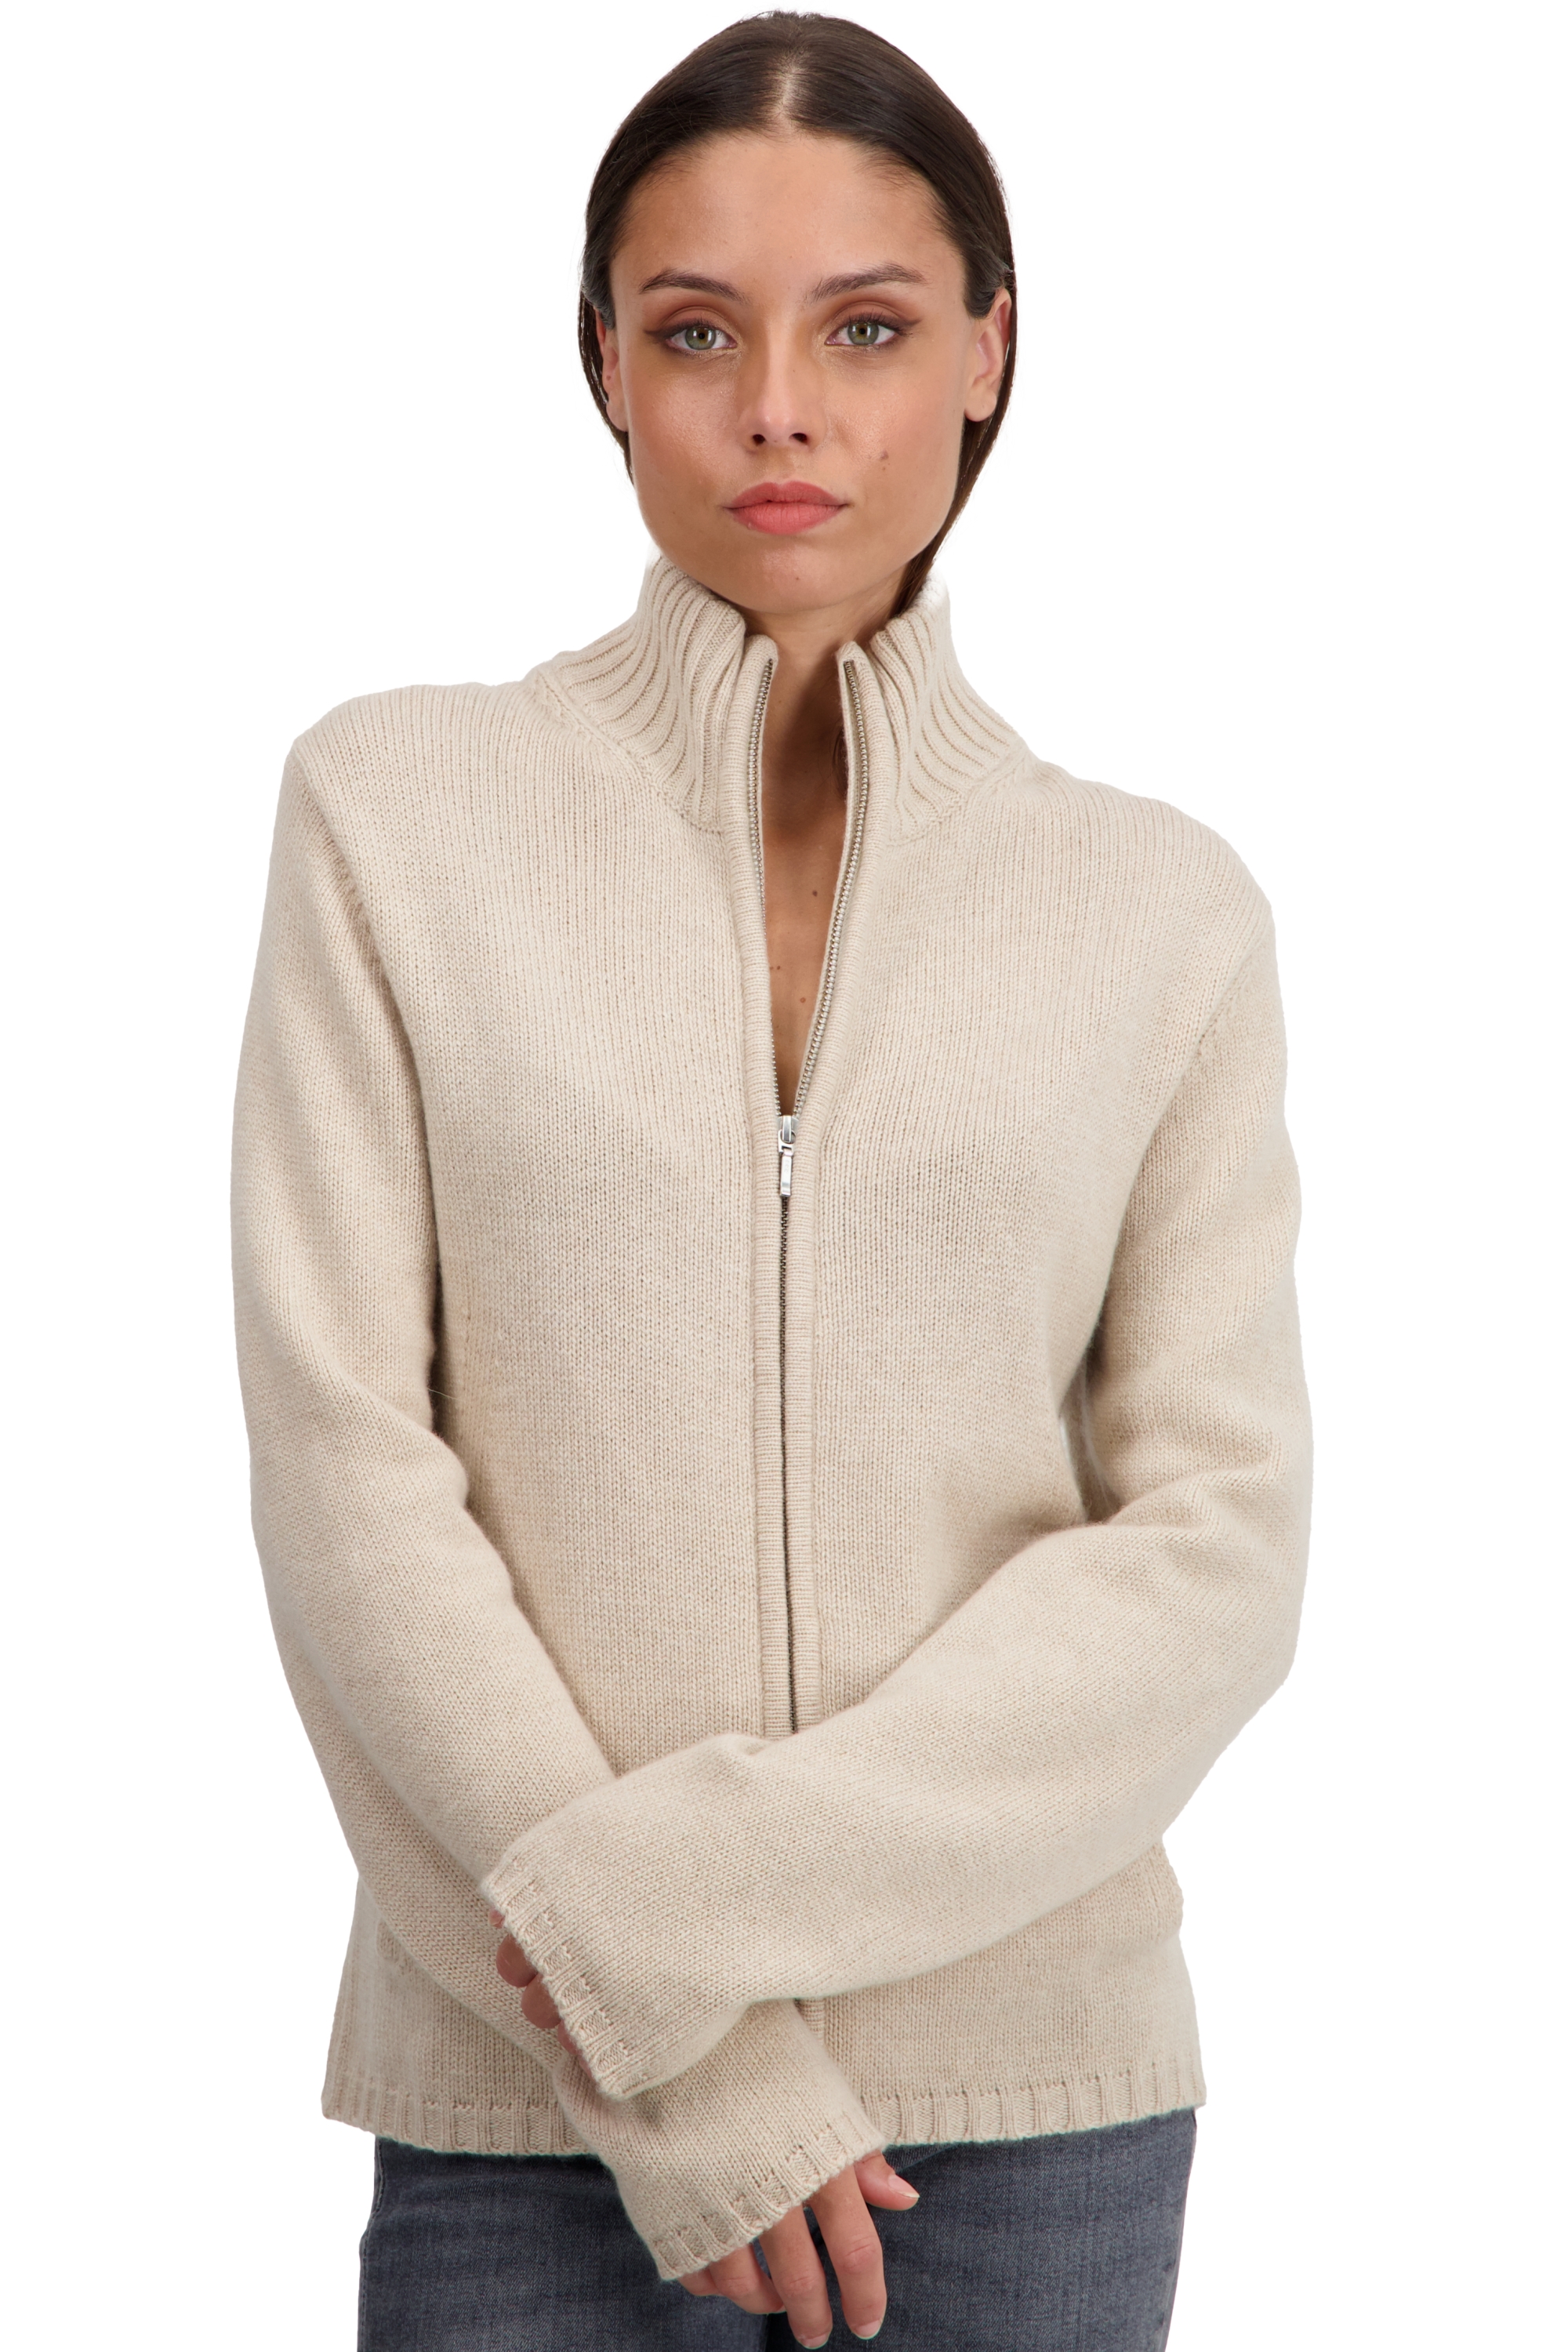 Cashmere ladies timeless classics elodie natural beige 2xl